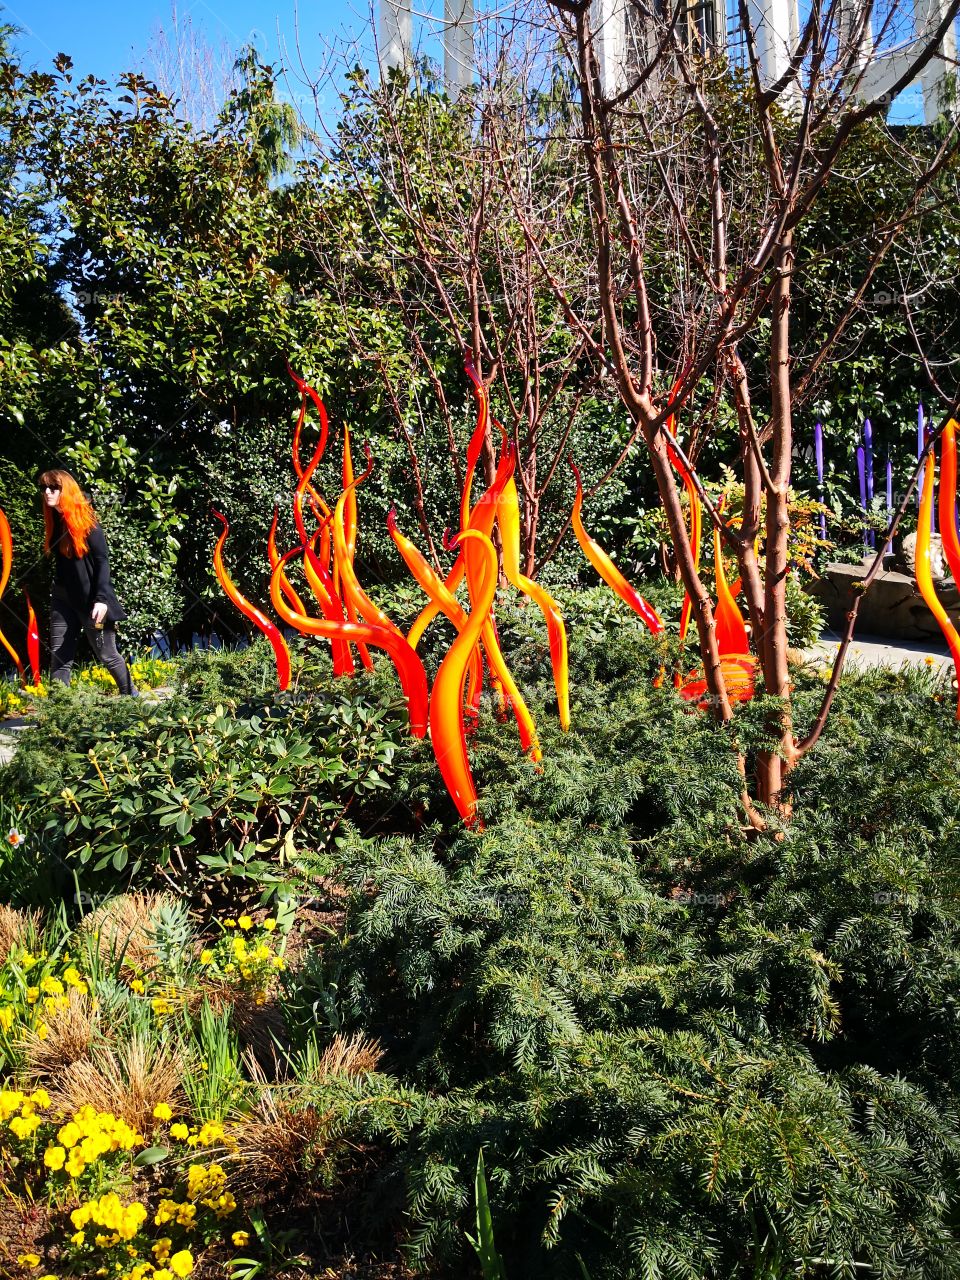 chihuly glass garden in Seattle, WA. so many colors.